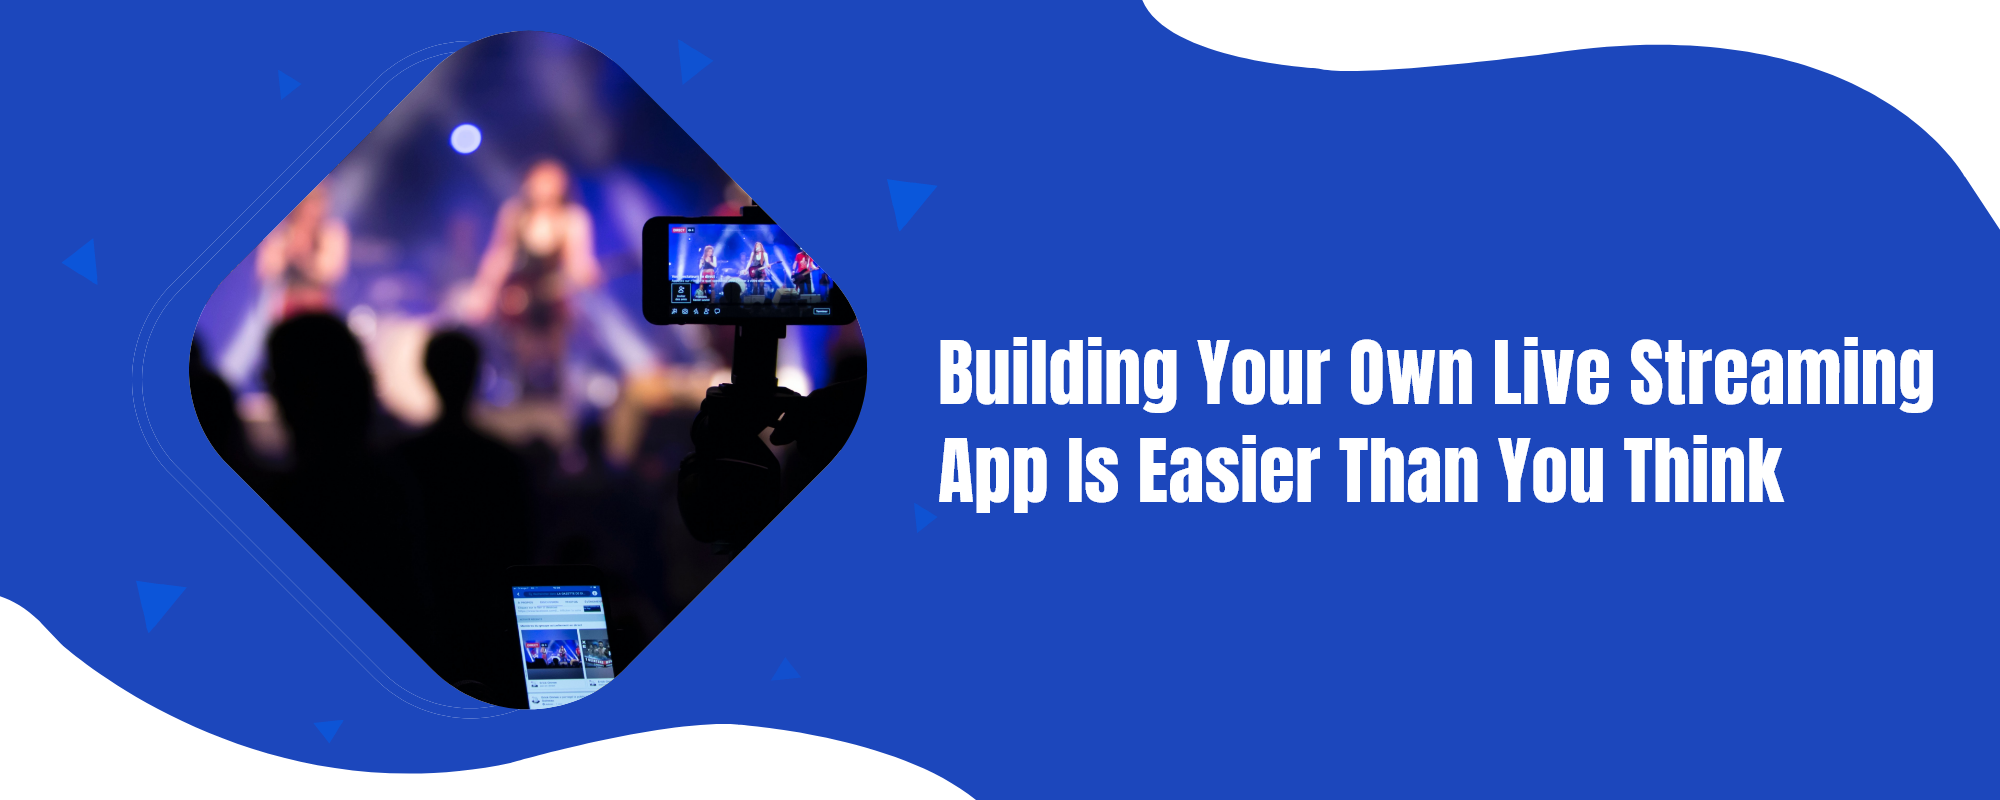 Building your own live streaming app